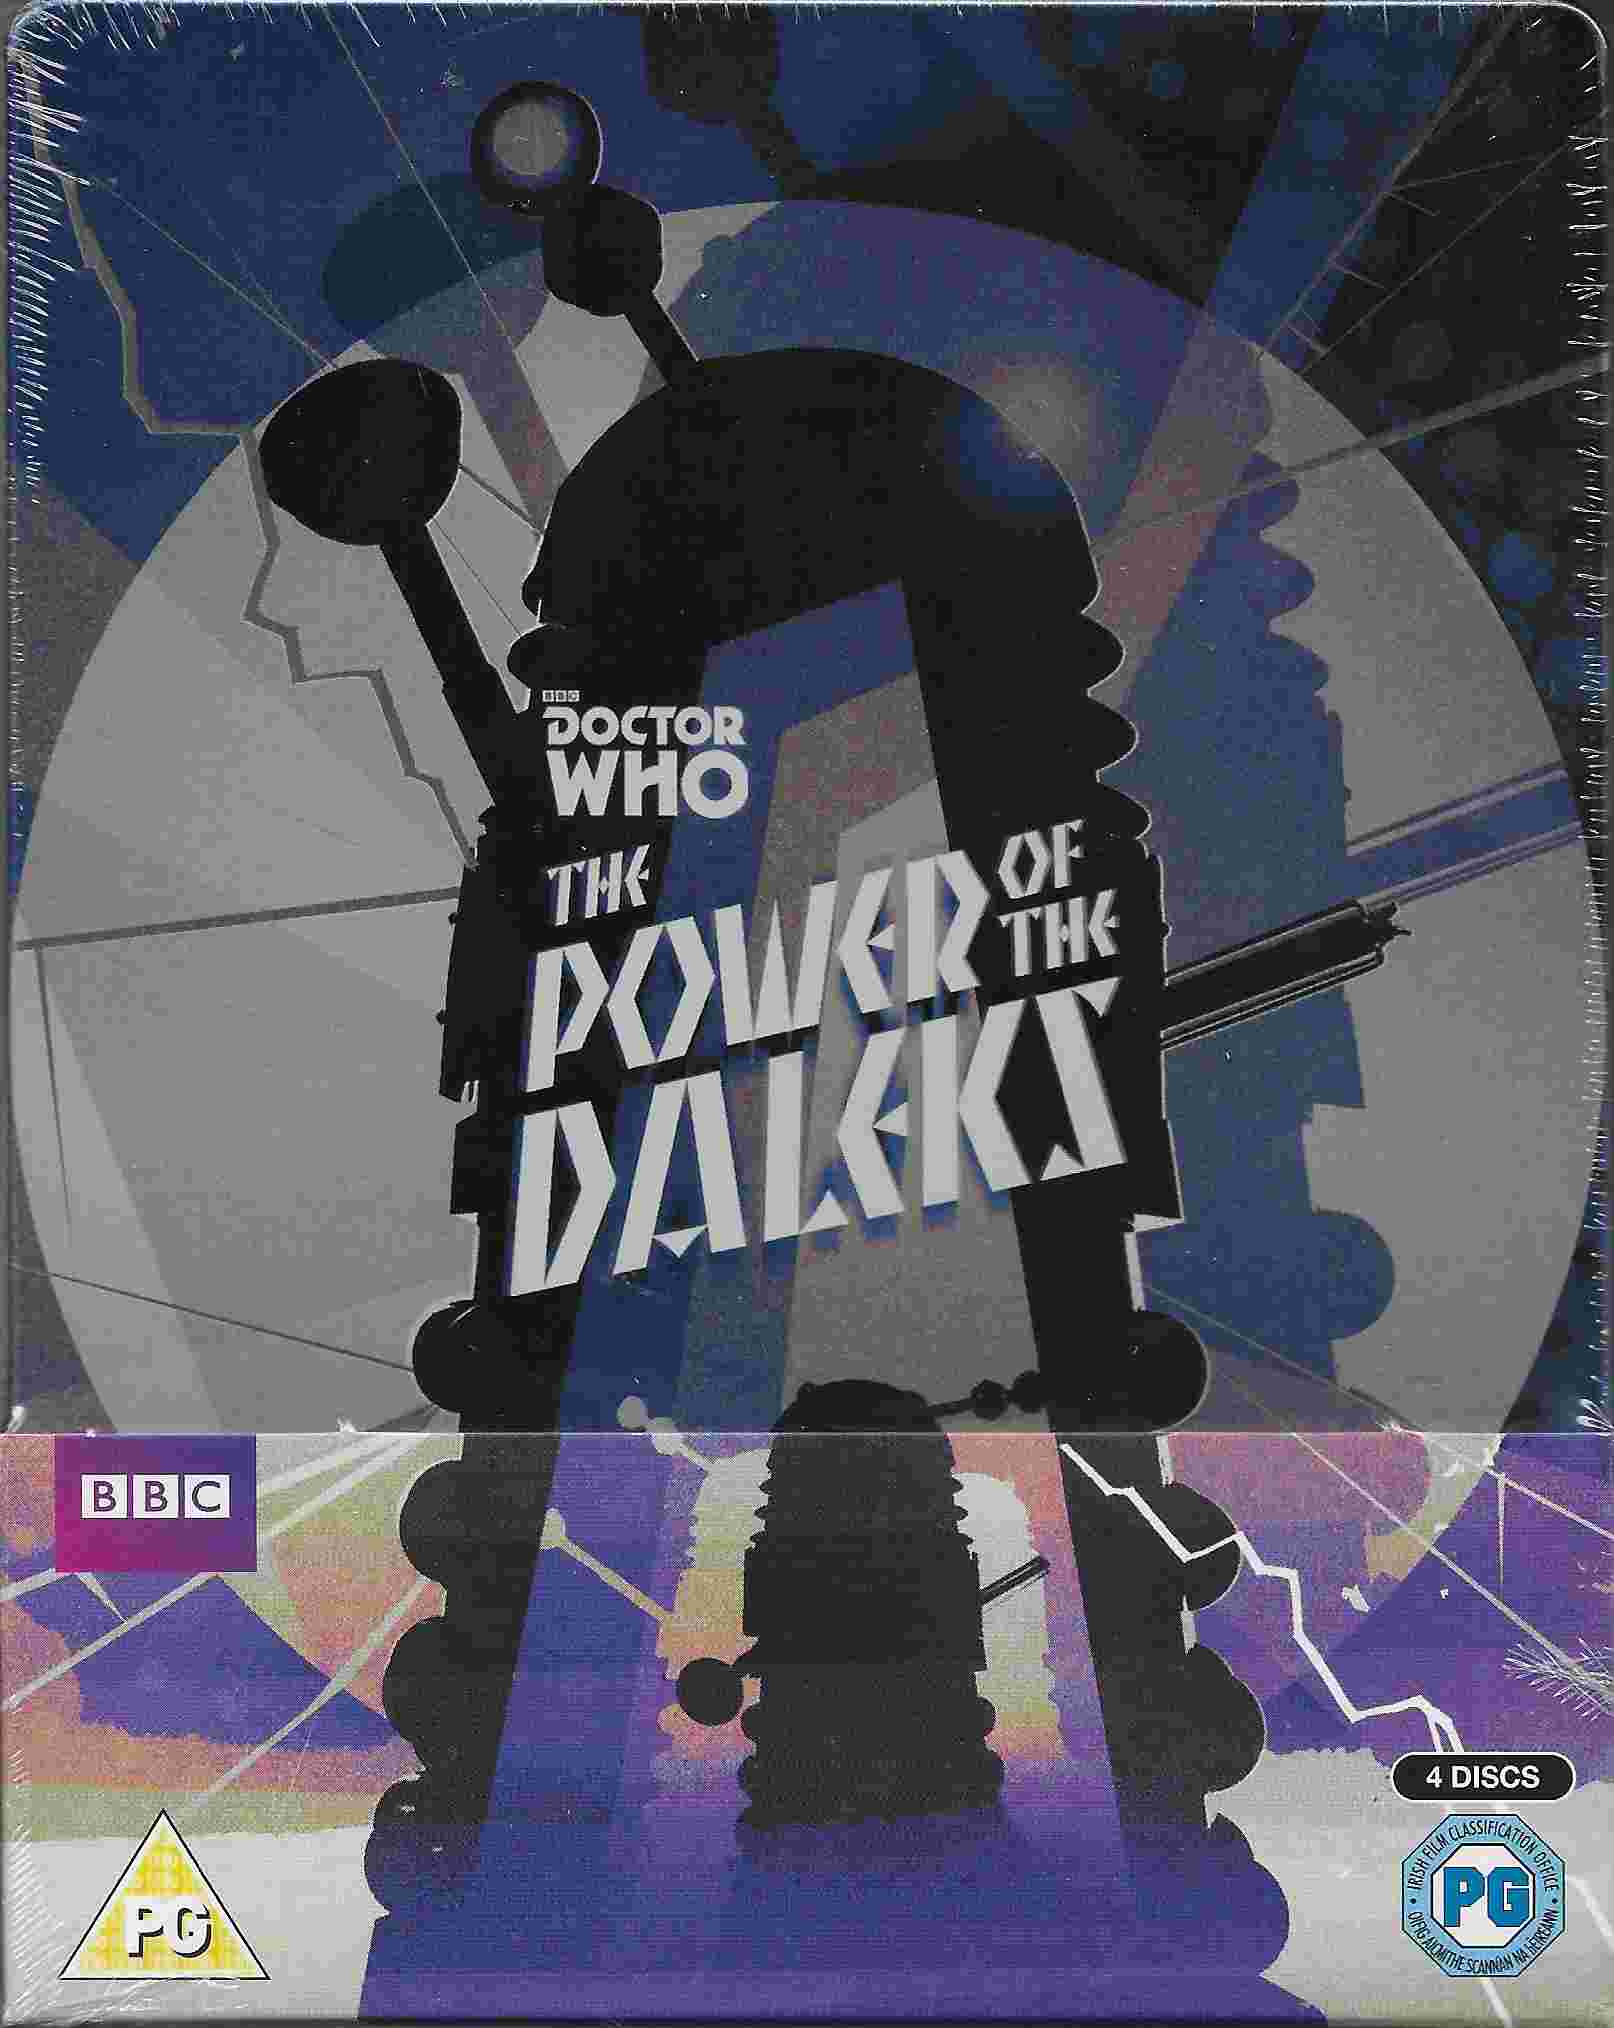 Picture of BBCBD 0390 Doctor Who - The power of the Daleks (Limited edition) by artist David Whitaker / Dennis Spooner from the BBC blu-rays - Records and Tapes library